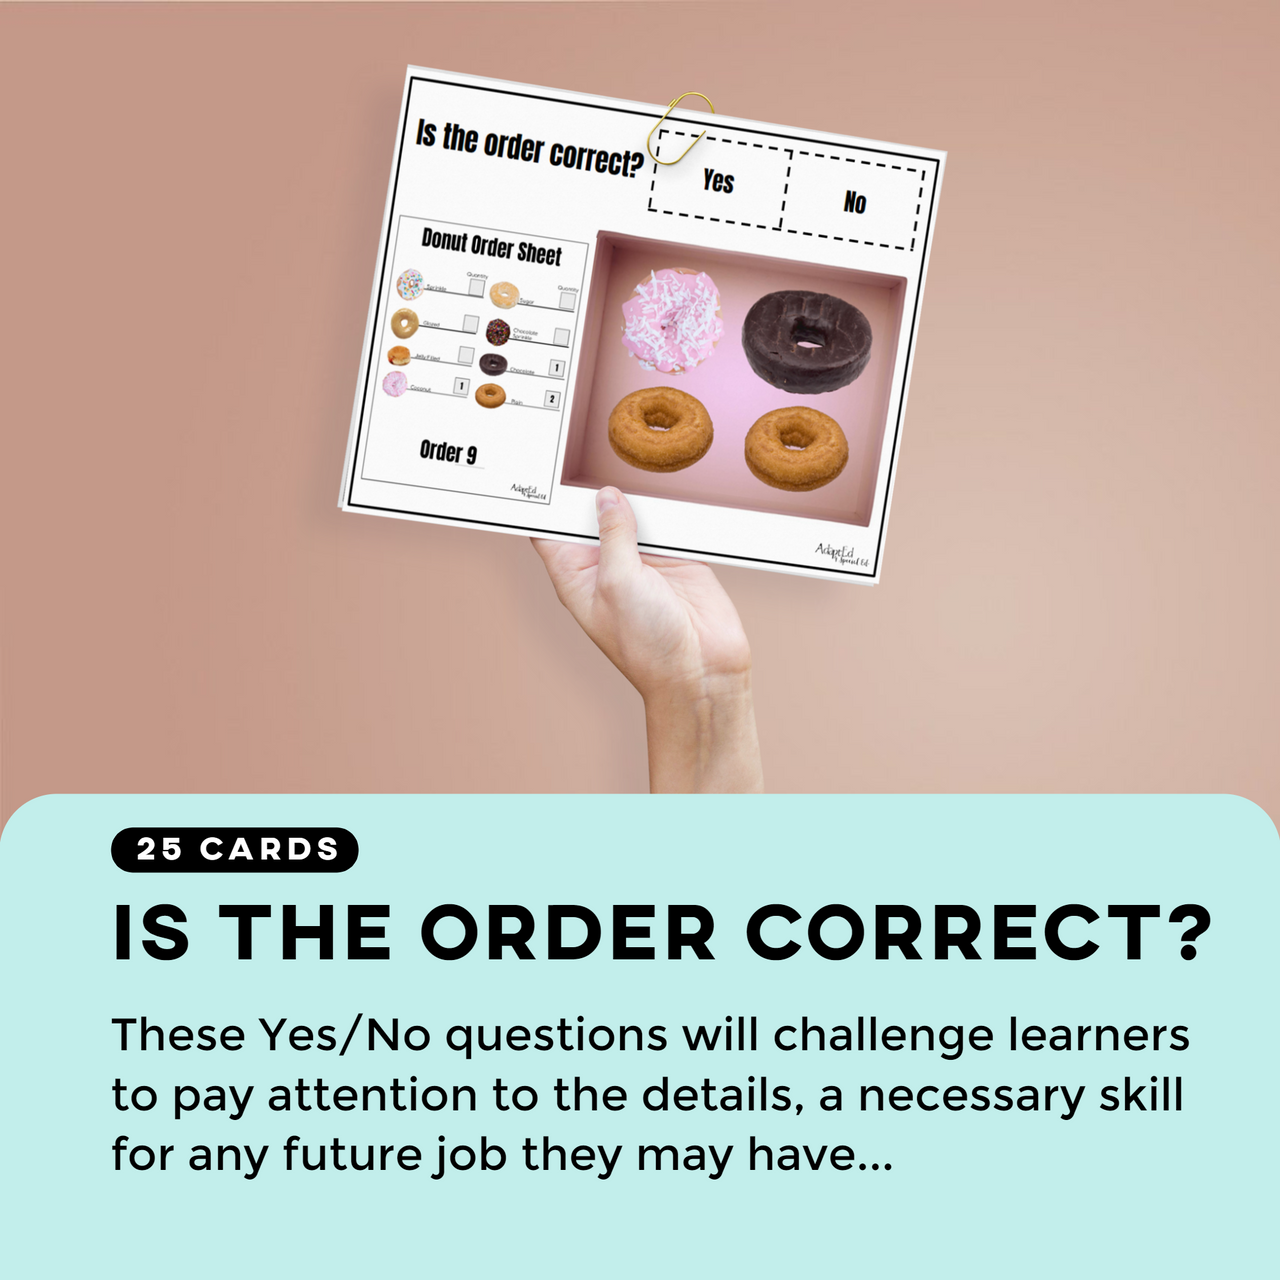 Fill the Order: Donut Shop (Interactive Digital + Printable PDF) Fill the Order - AdaptEd4SpecialEd